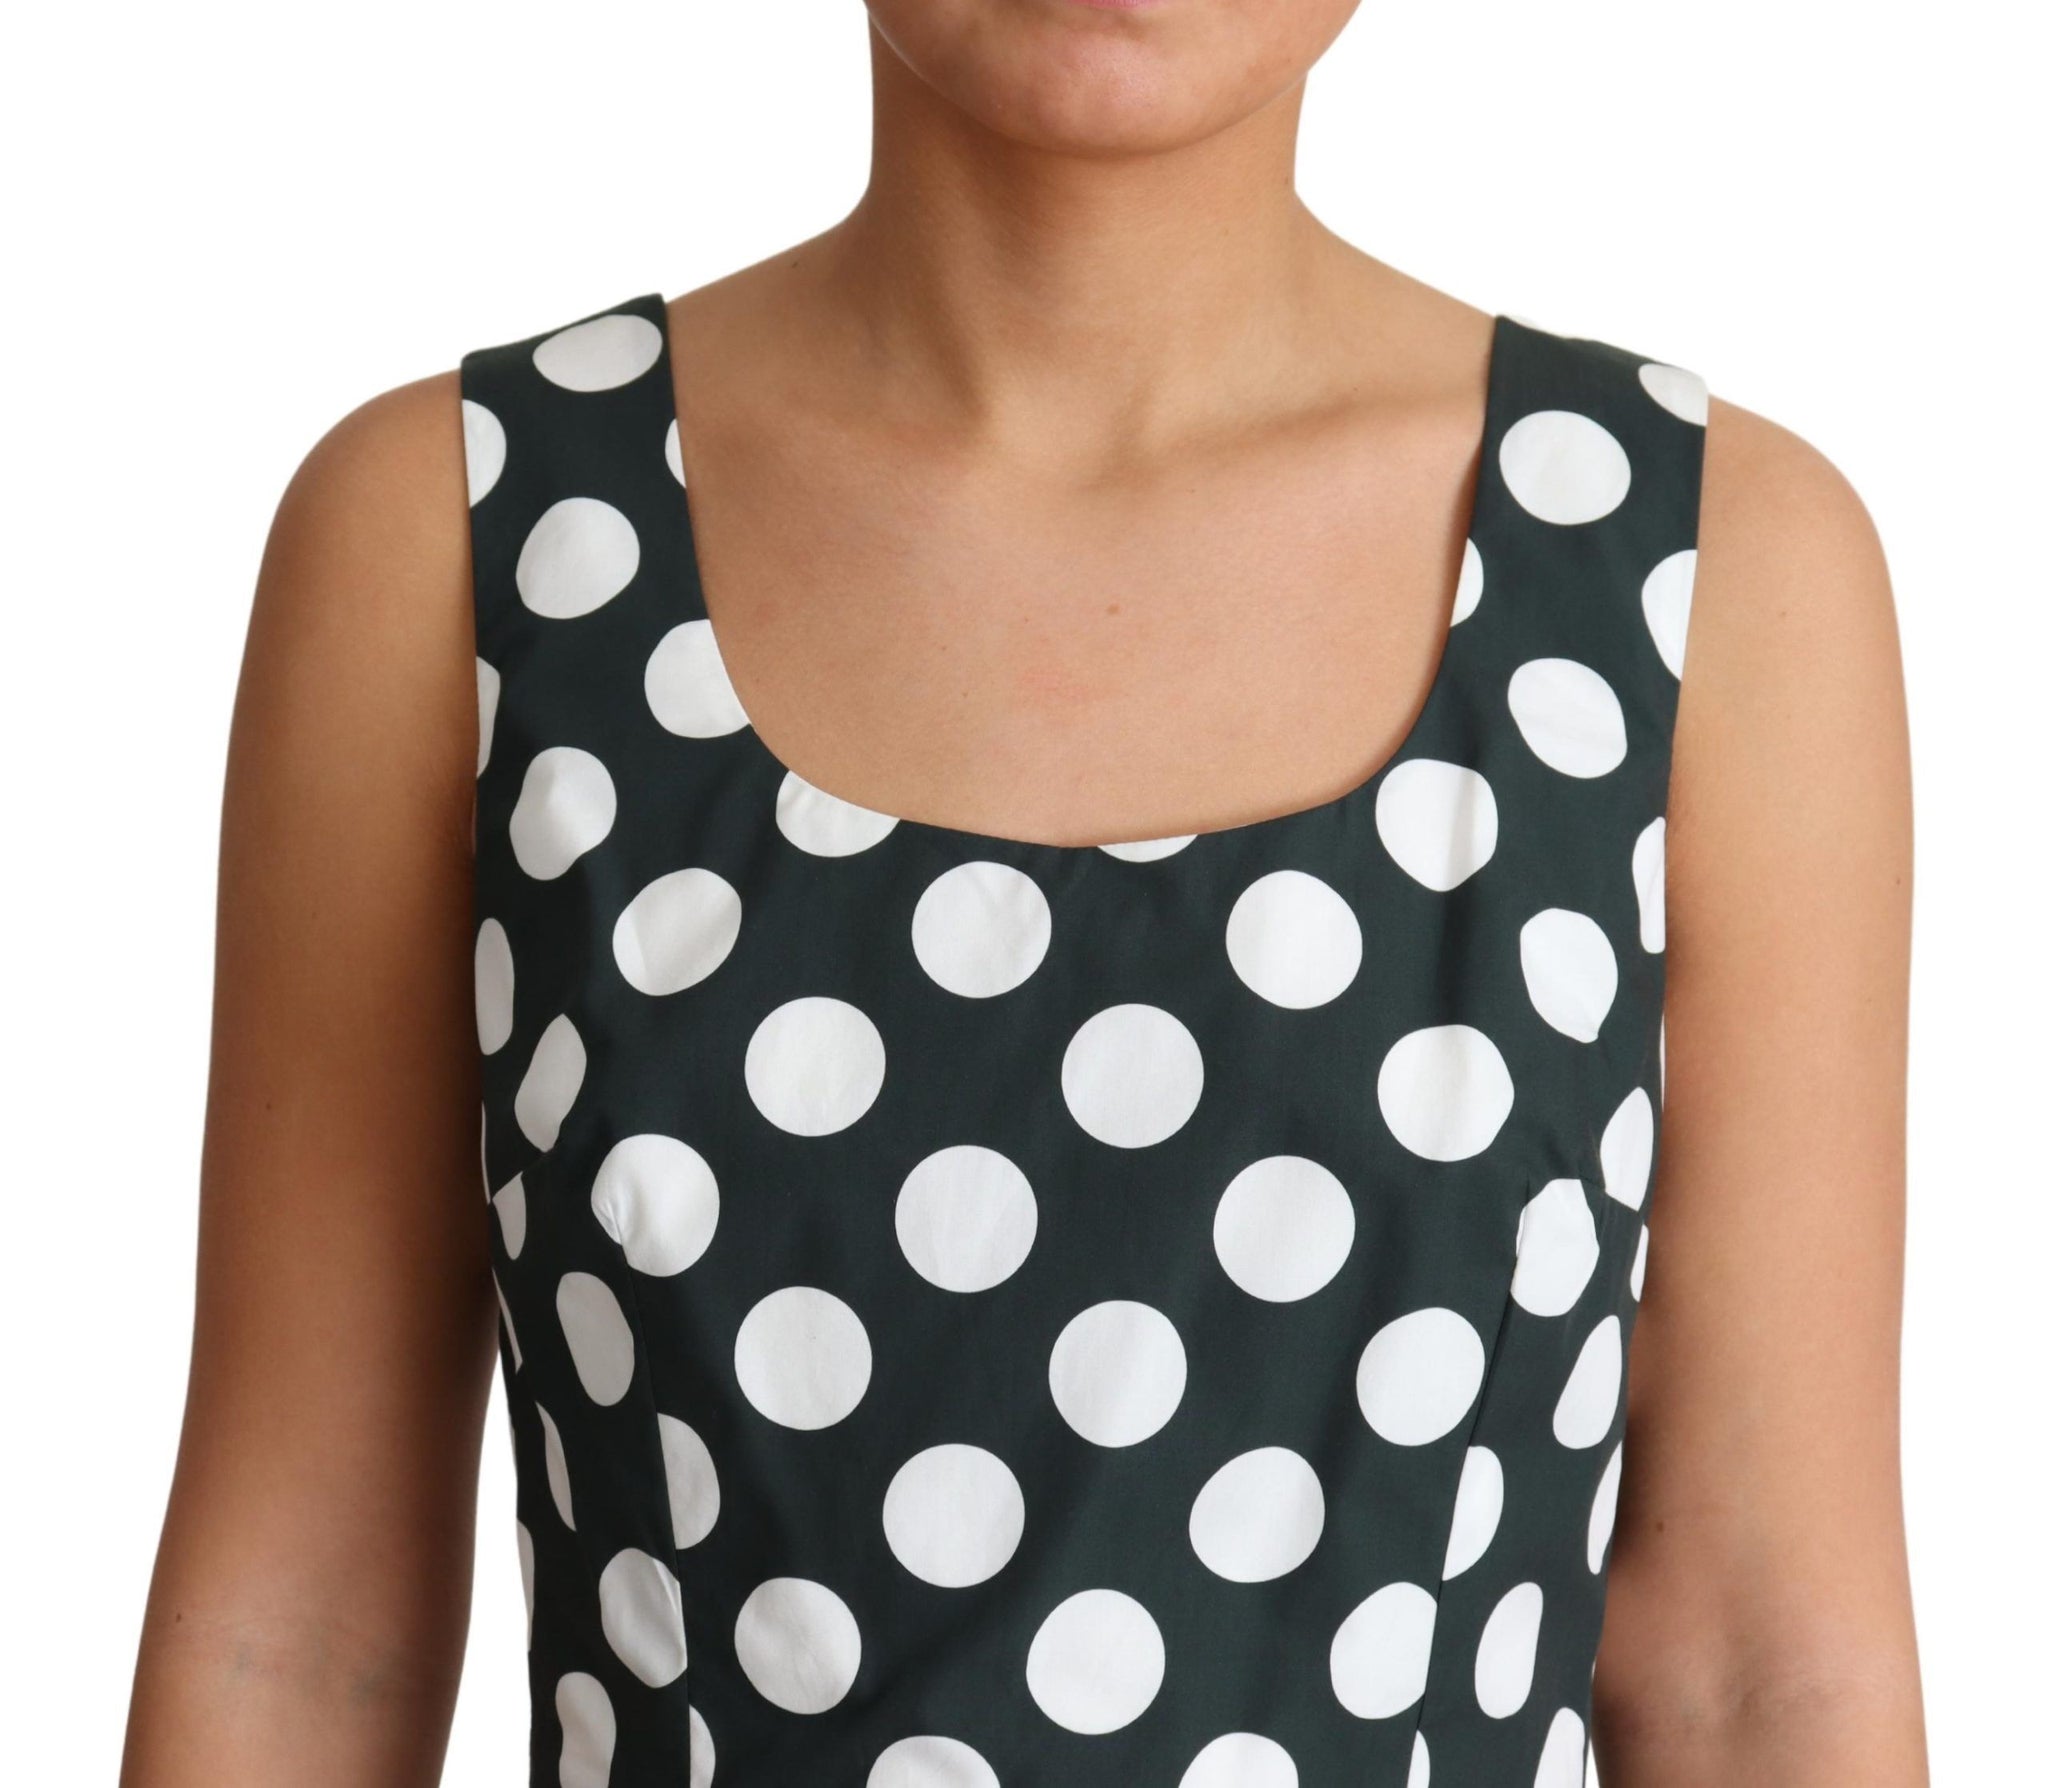 Green Polka Dotted Cotton A-Line Dress